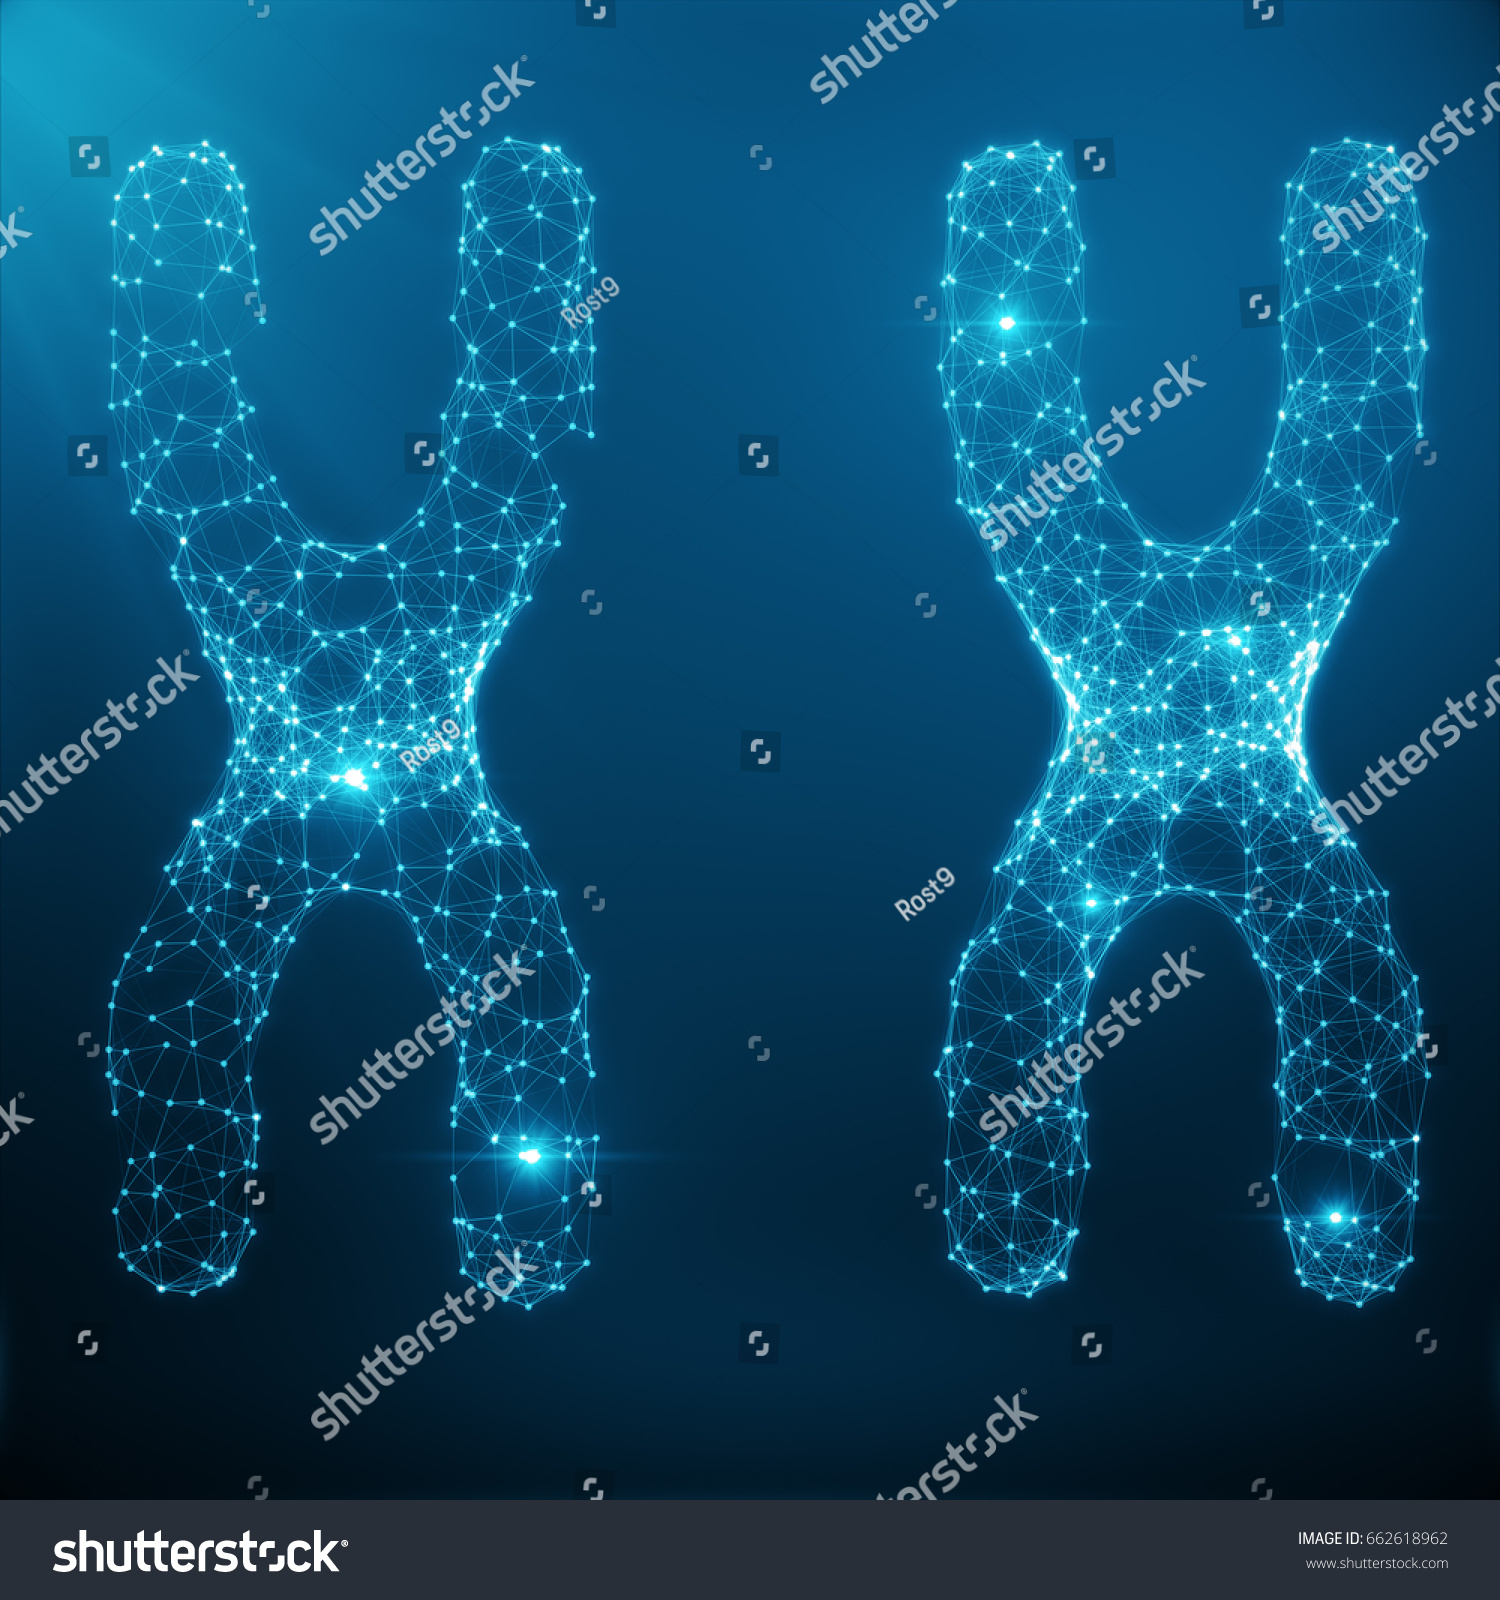 stock-photo-xx-chromosome-concept-for-human-biology-medical-symbol-gene-therapy-or-microbiology-genetics-662618962.jpg